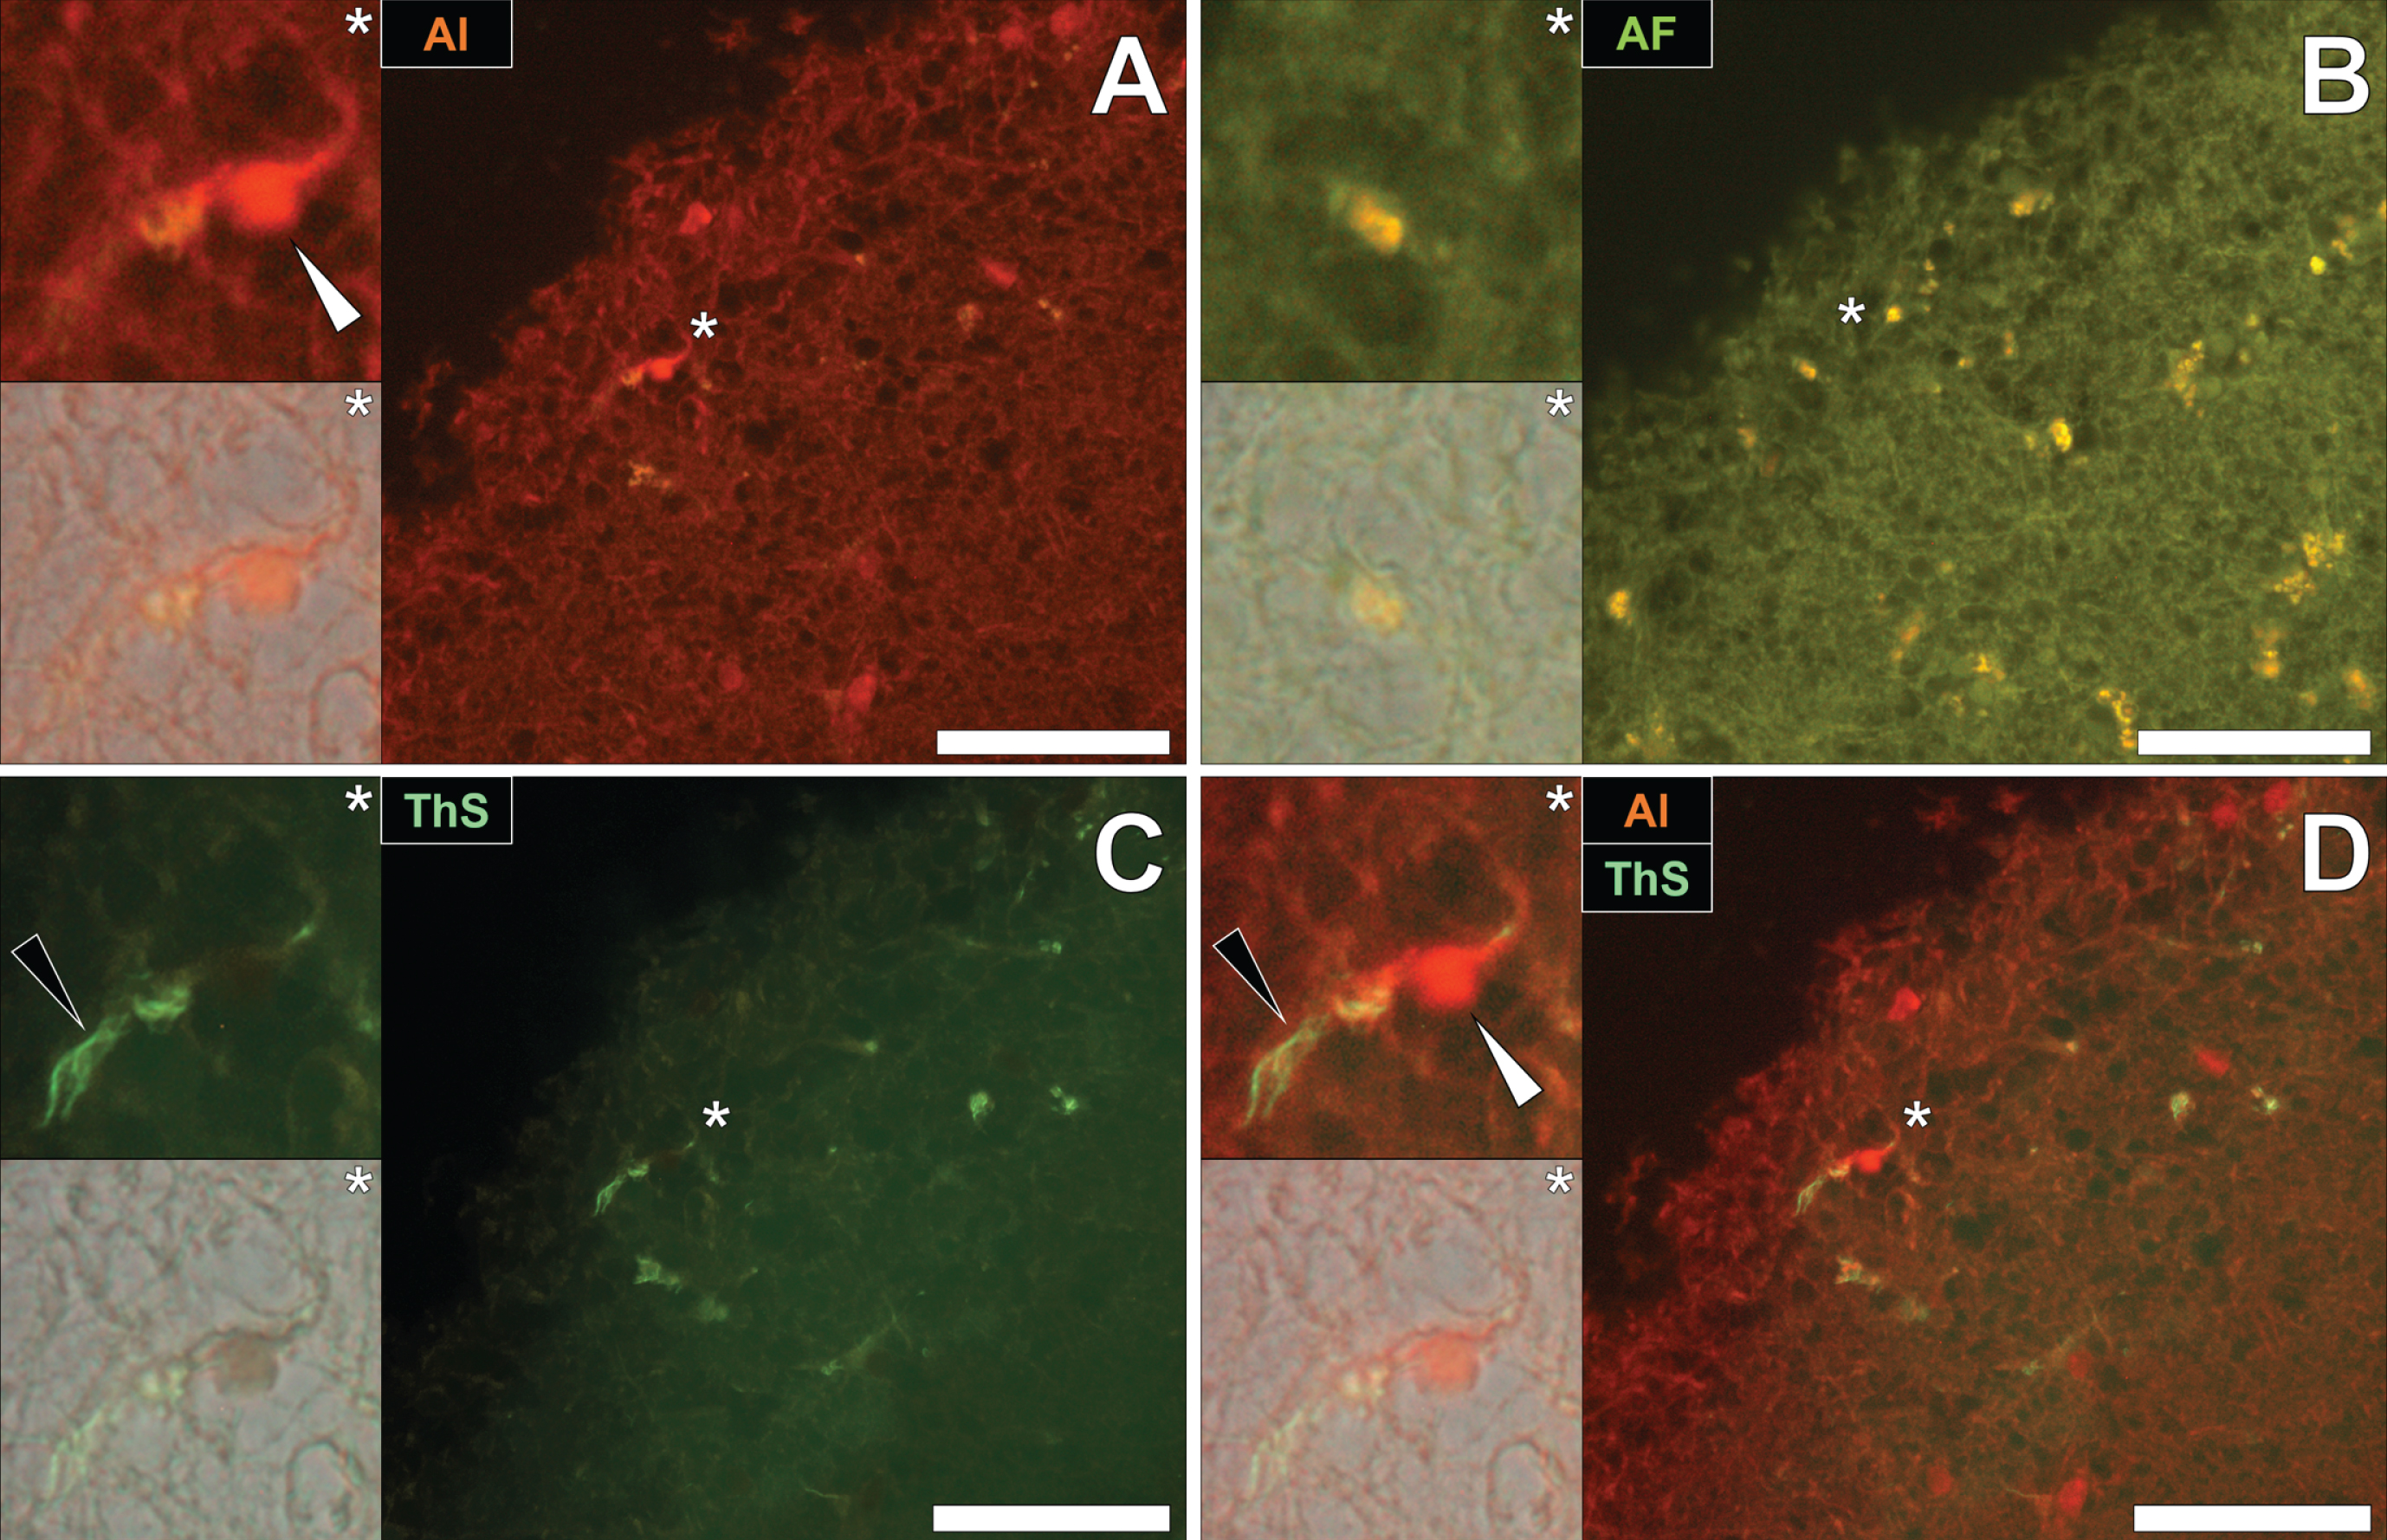 Intracellular aluminum co-located with ThS-reactive NFTs in neurons in the temporal cortex of a 60-year-old male donor with epilepsy. A) Intranuclear aluminum (orange, white arrows) and (B) autofluorescence of the non-stained section. C) The identical neuronal cell exhibiting positive (green) fluorescence for NFTs (black arrows) with (D) merging of fluorescence channels depicting their co-localization. Magnified inserts are denoted by asterisks in the respective fluorescence micrographs of which merging of the brightfield overlay is depicted in the lower panels. Al, aluminum; ThS, thioflavin S. Magnification: X 400, scale bars: 50μm.